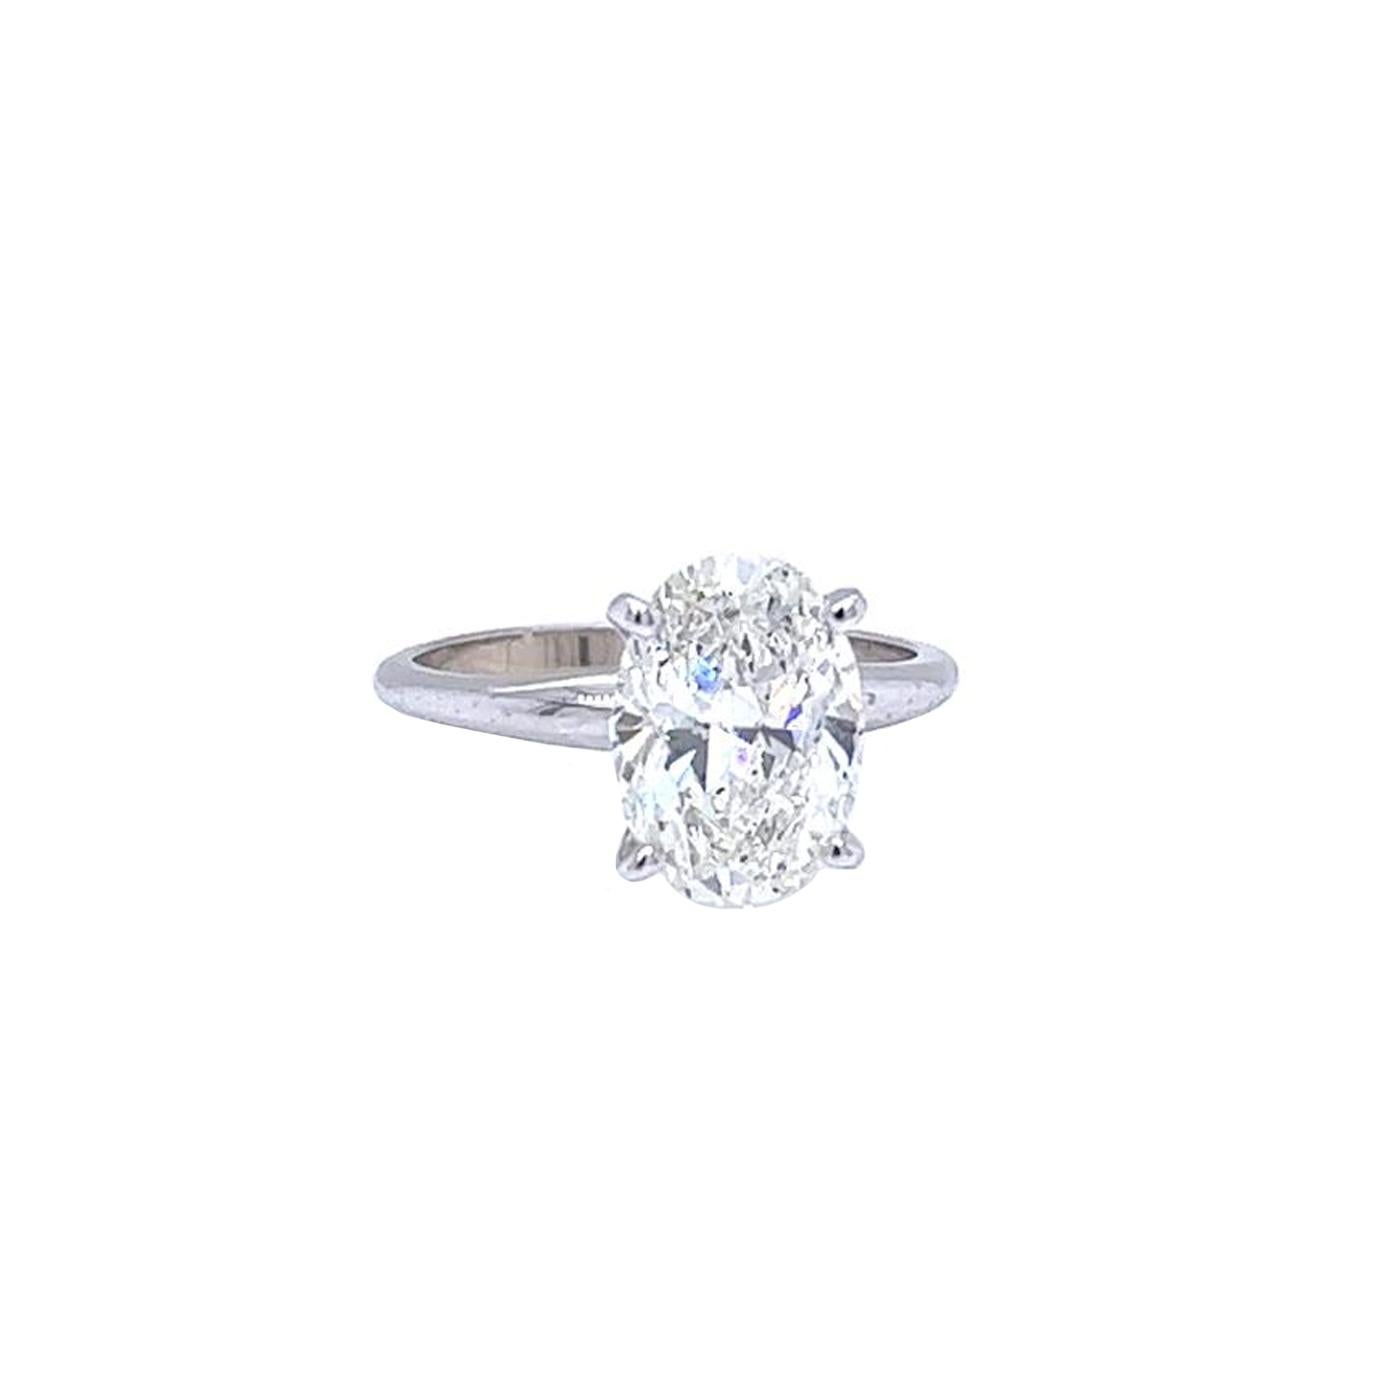 Modernist GIA Certified 3.02 Carat Oval Cut Diamond Tiffany Style 14K White Gold Ring For Sale